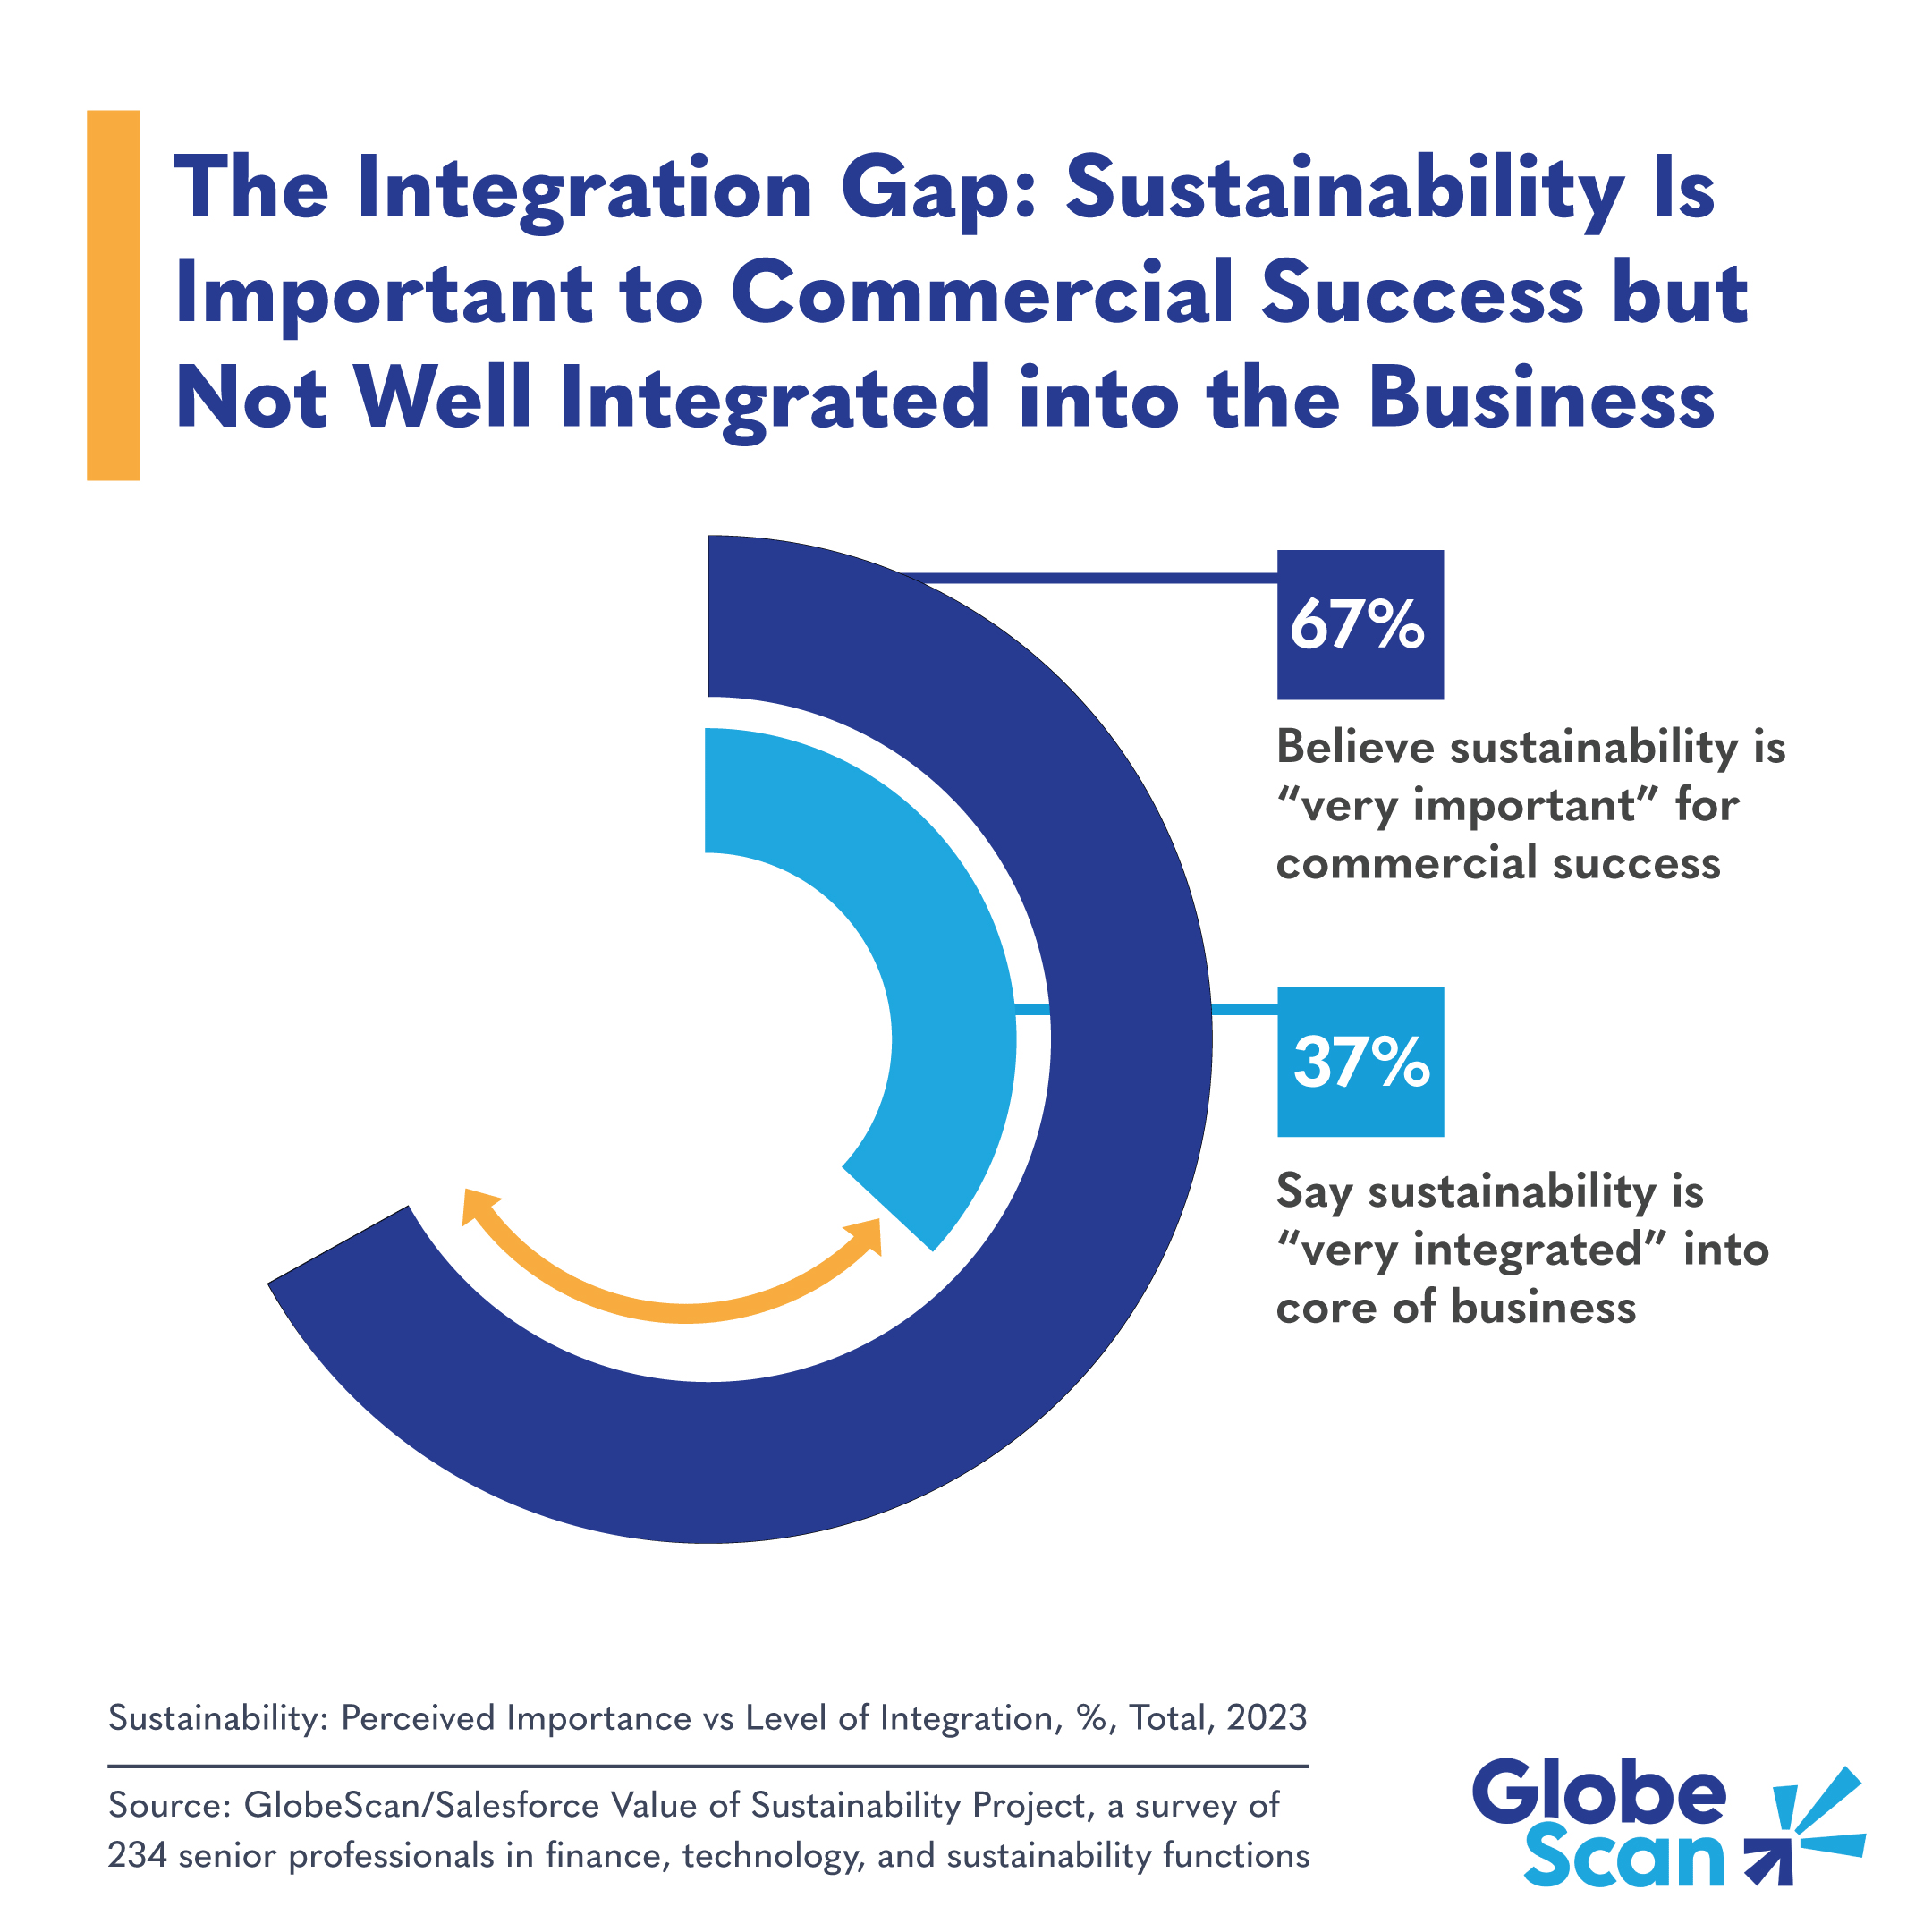 The Integration Gap: Sustainability Is Important to Commercial Success but Not Well Integrated into the Business